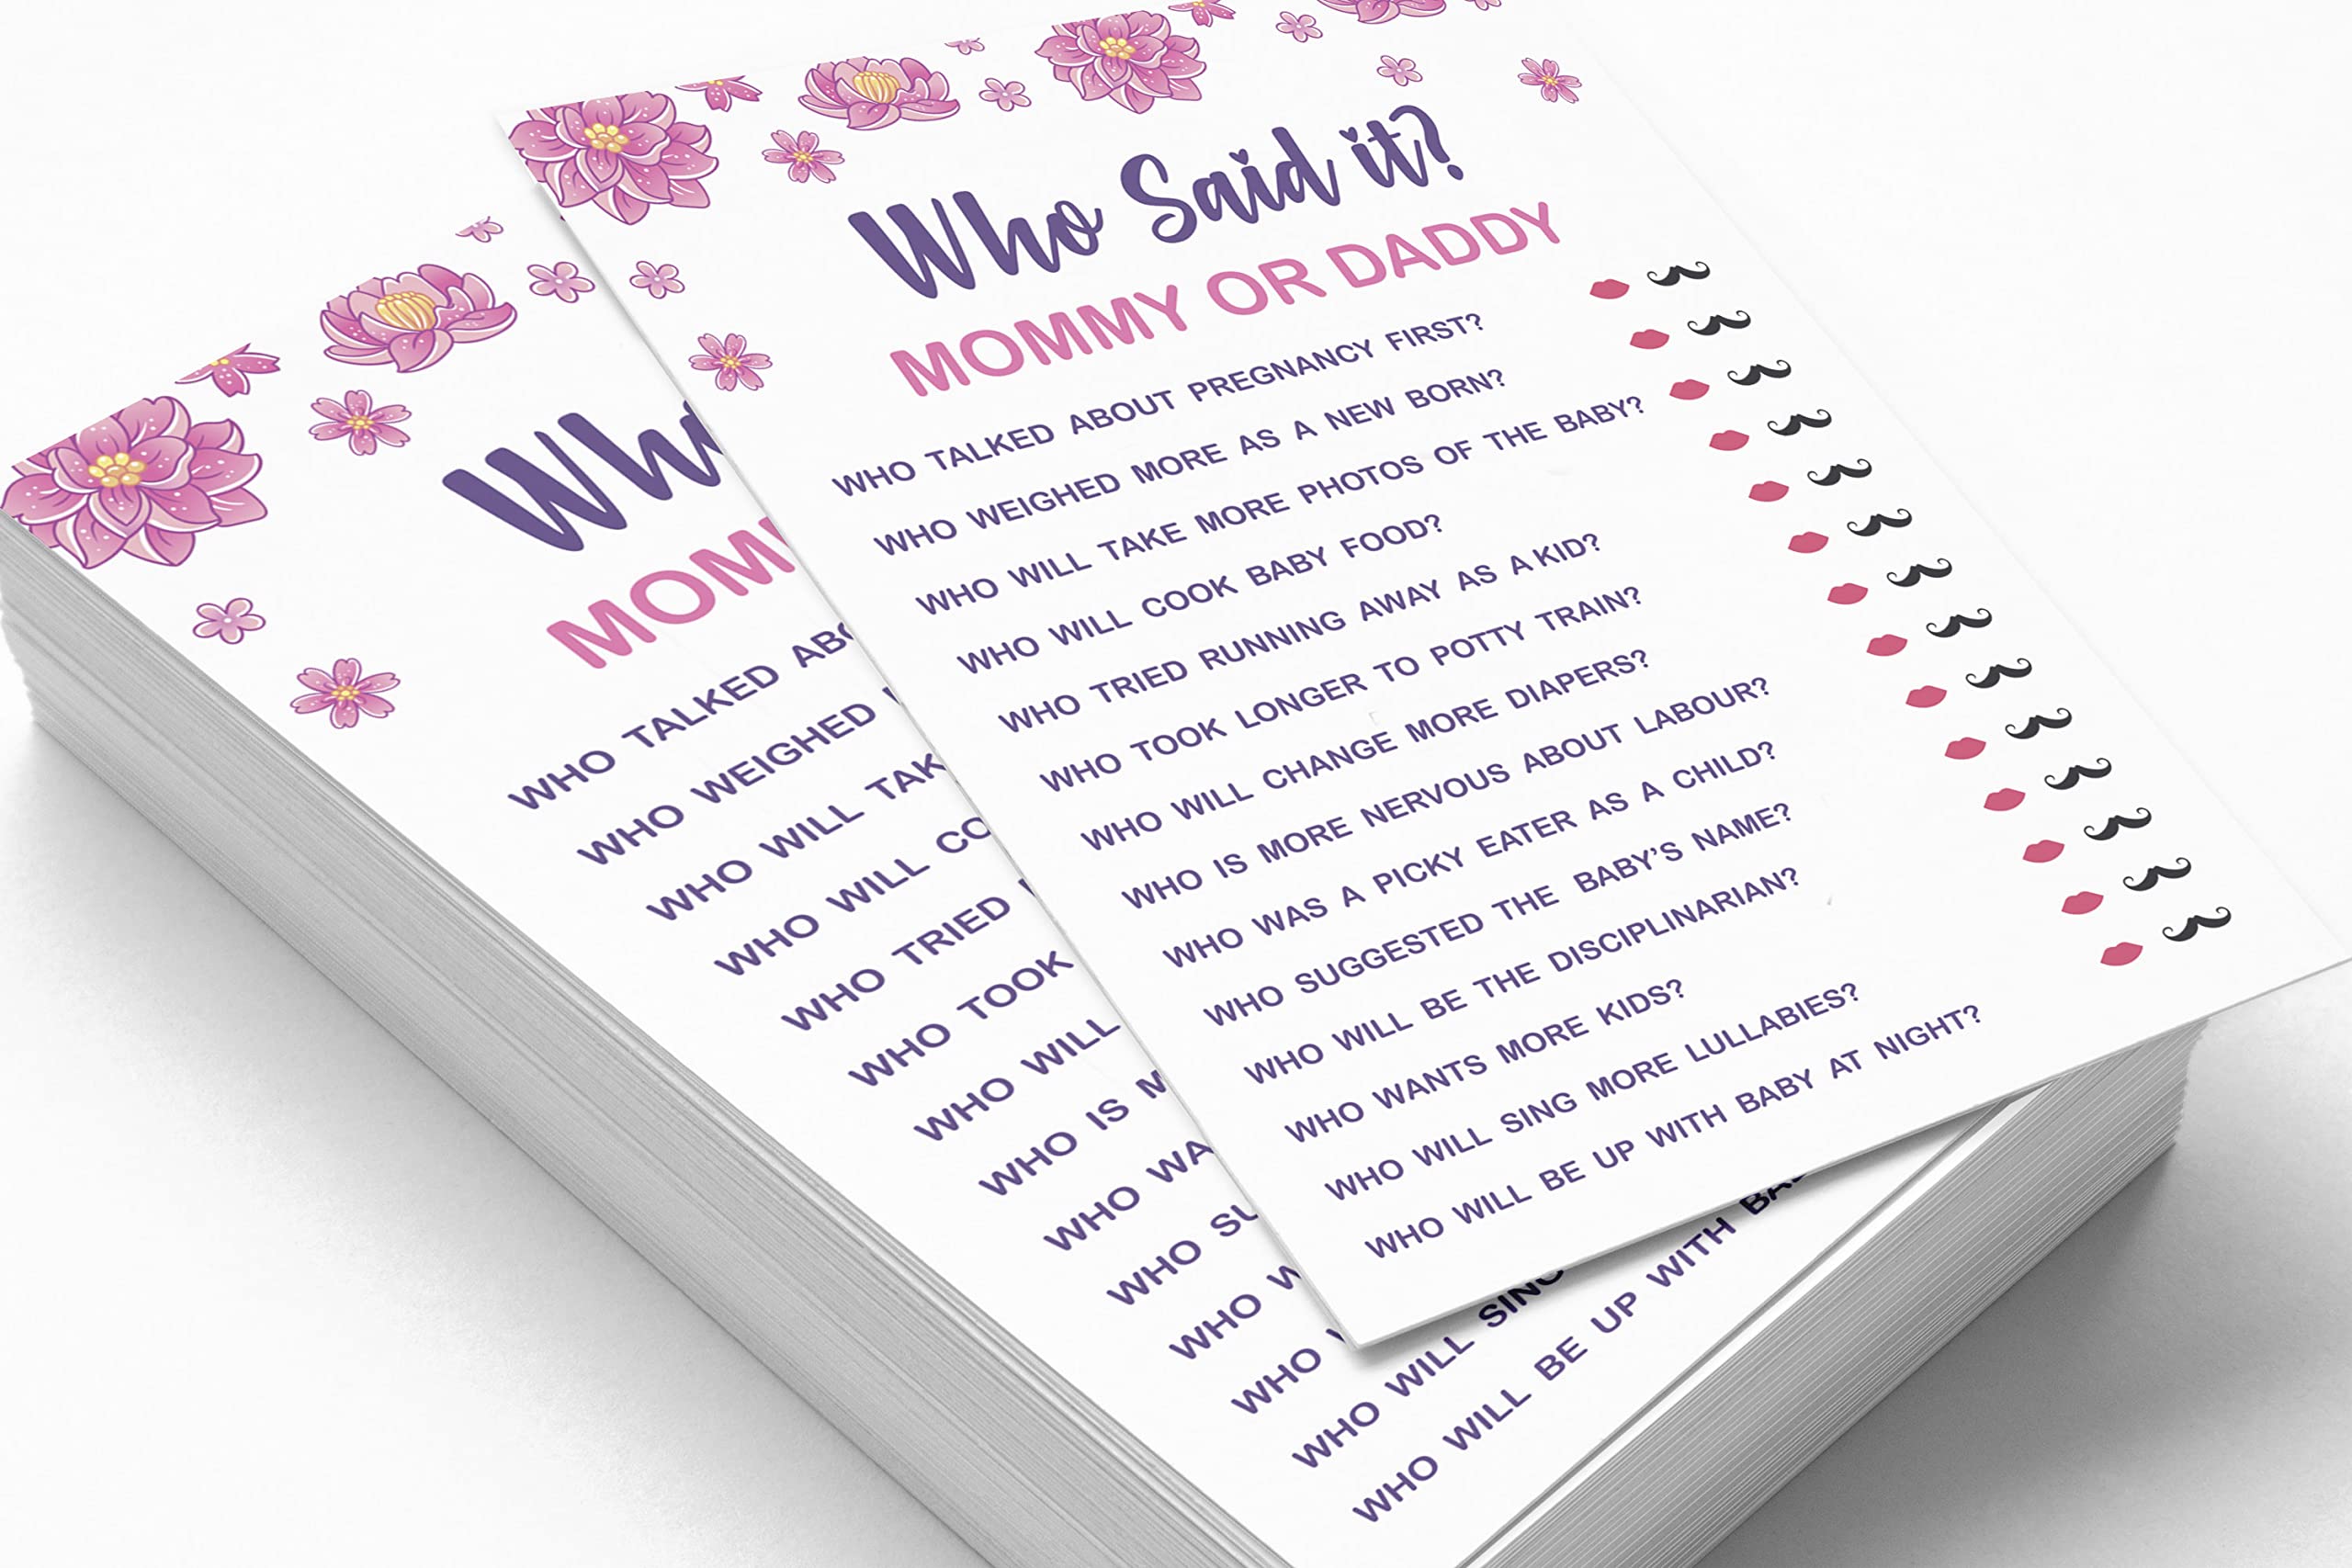 Inkdotpot Who Said it Game Mommy Or Daddy 50 Sheet Fun Baby Shower Game Unicorn Floral Party Supply